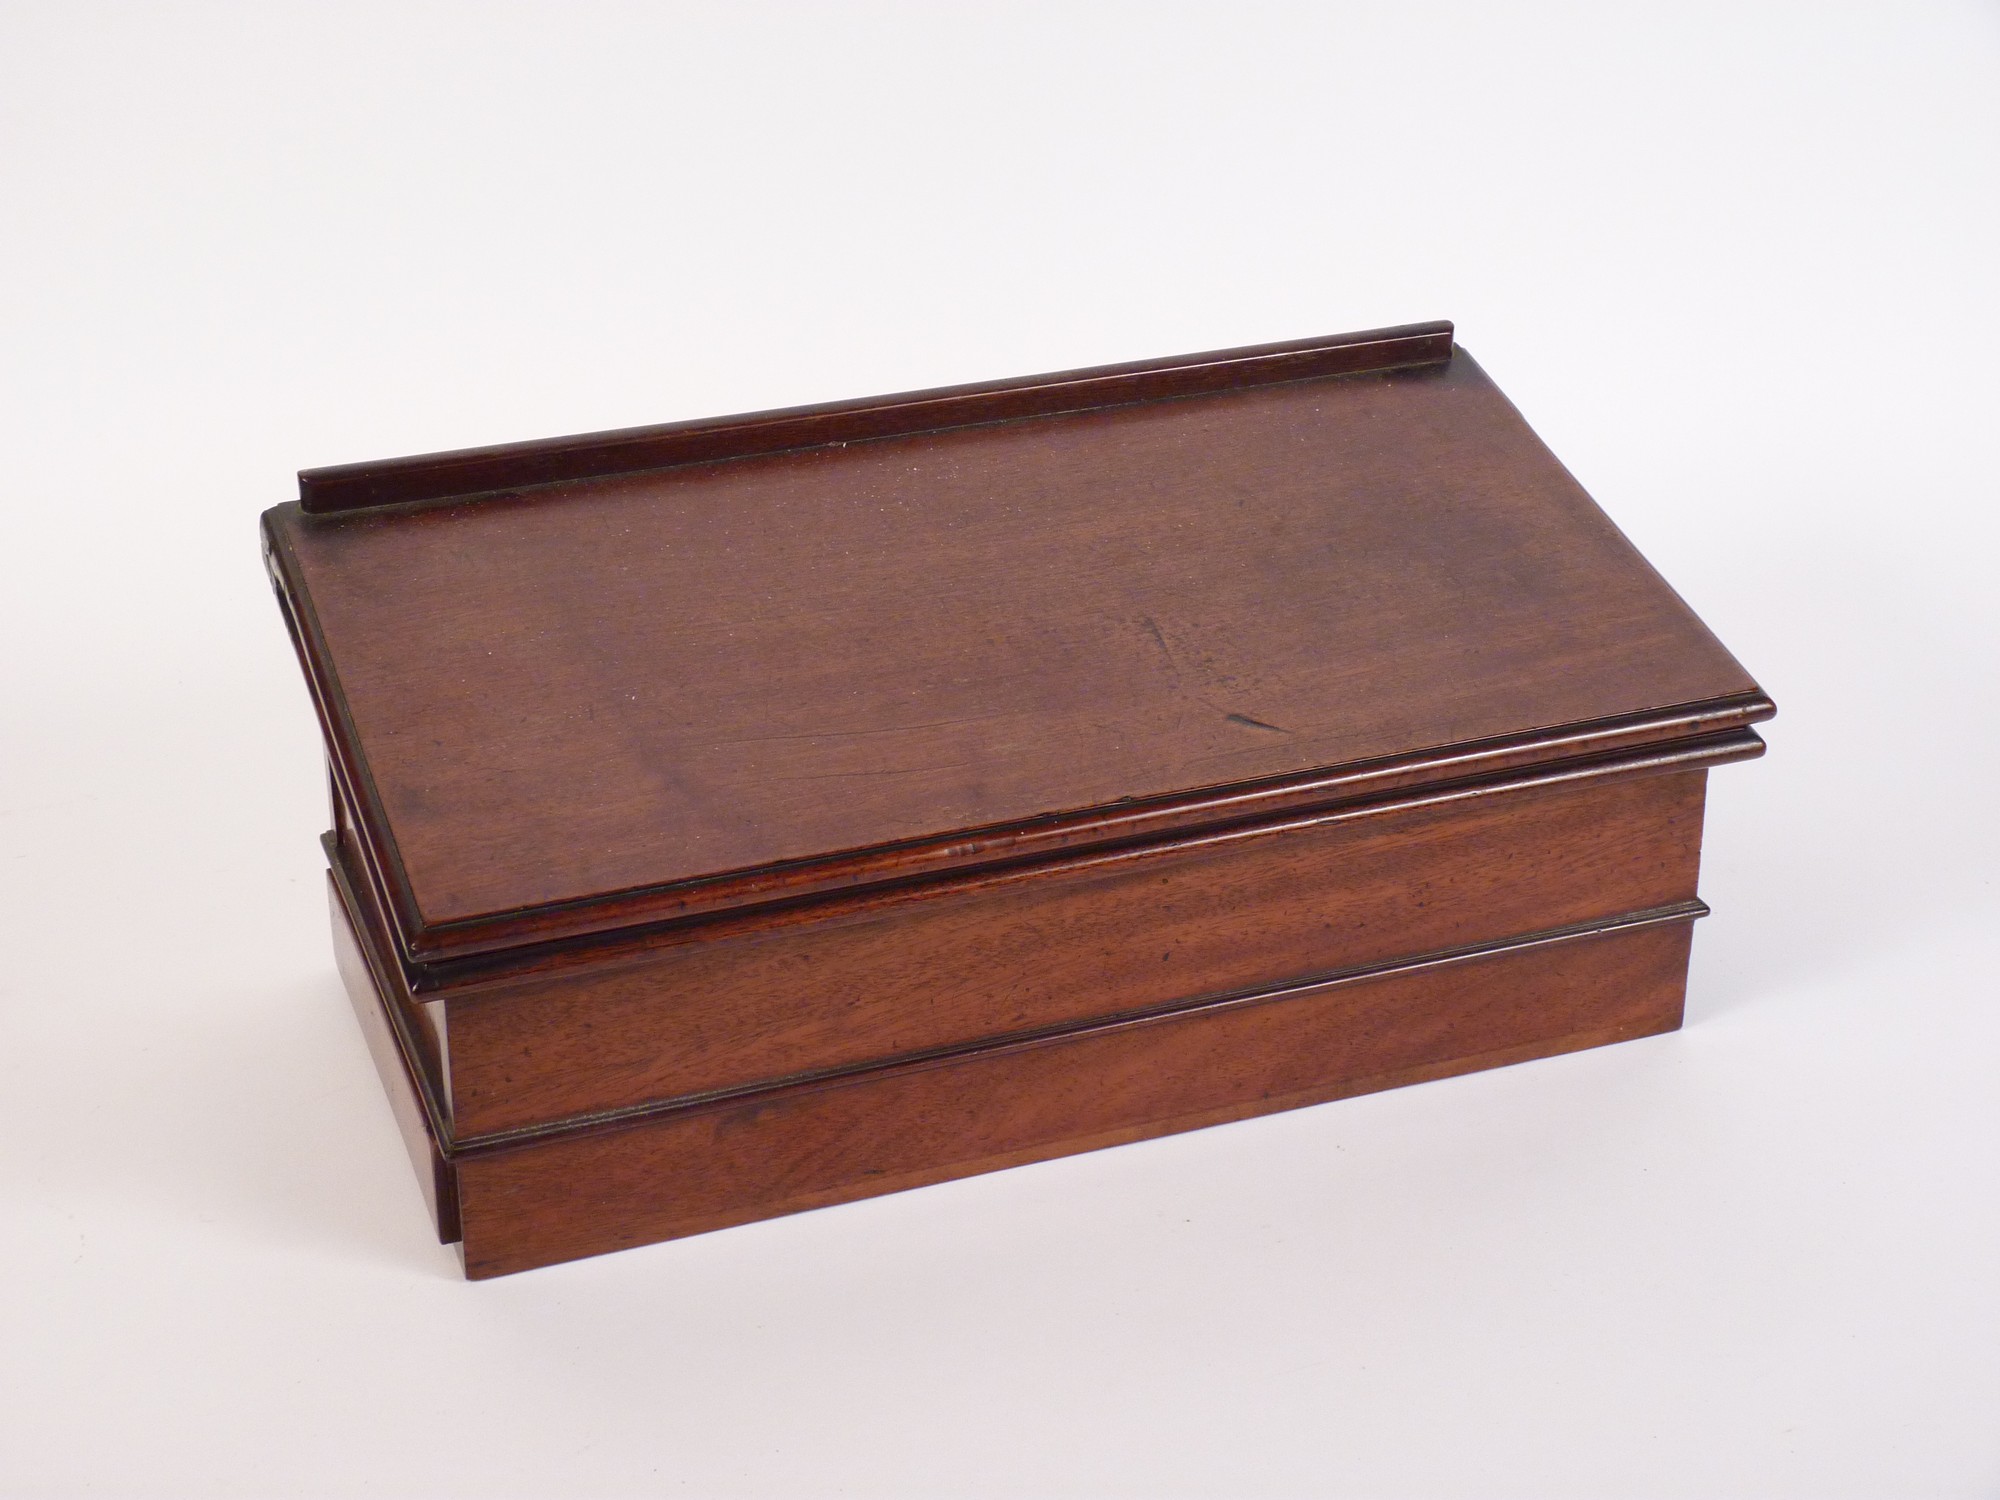 A Chippendale period mahogany campaign desk,
c.1775, the sloping hinged top opening to reveal a